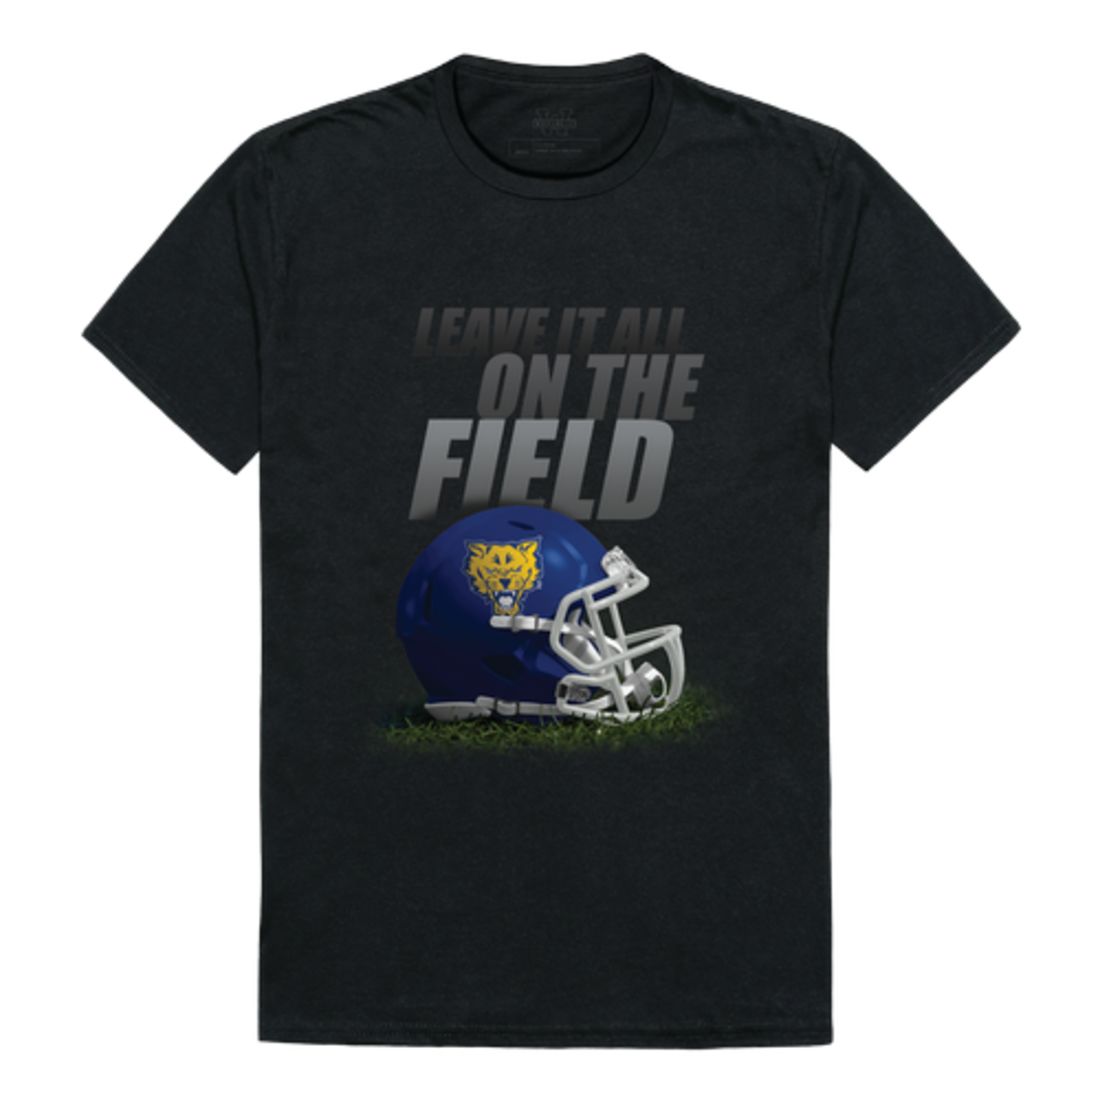 Fort Valley State University Wildcats Gridiron Football T-Shirt Tee